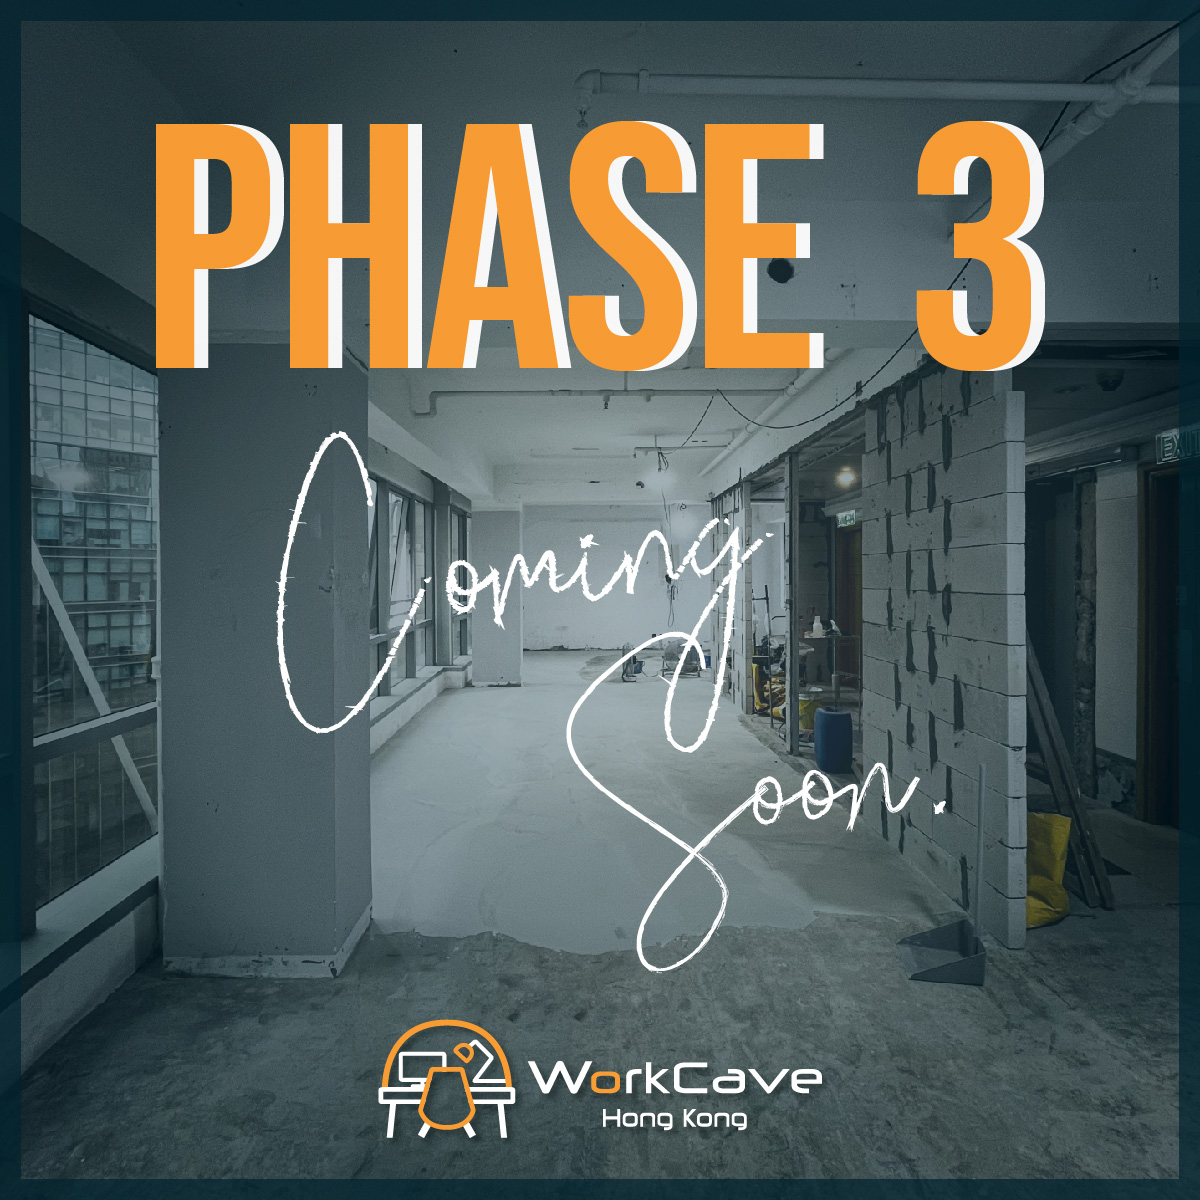 Concrete walls and floors showing renovation of WorkCave's new serviced offices in progress